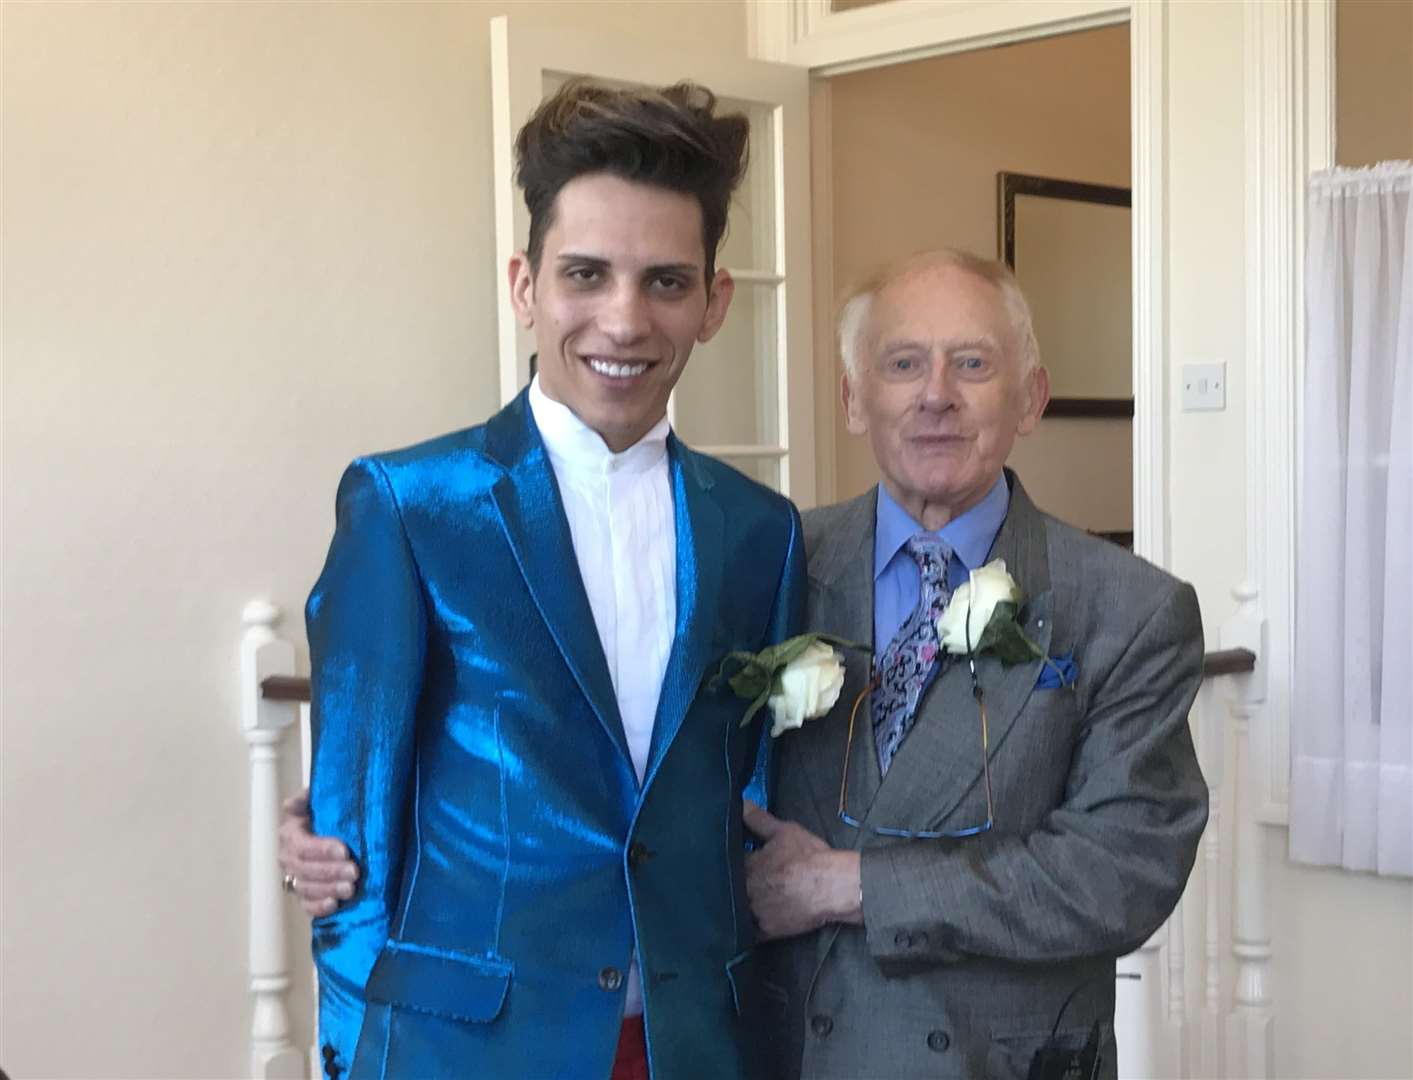 Philip Clements and Florin Marin on their wedding day last April